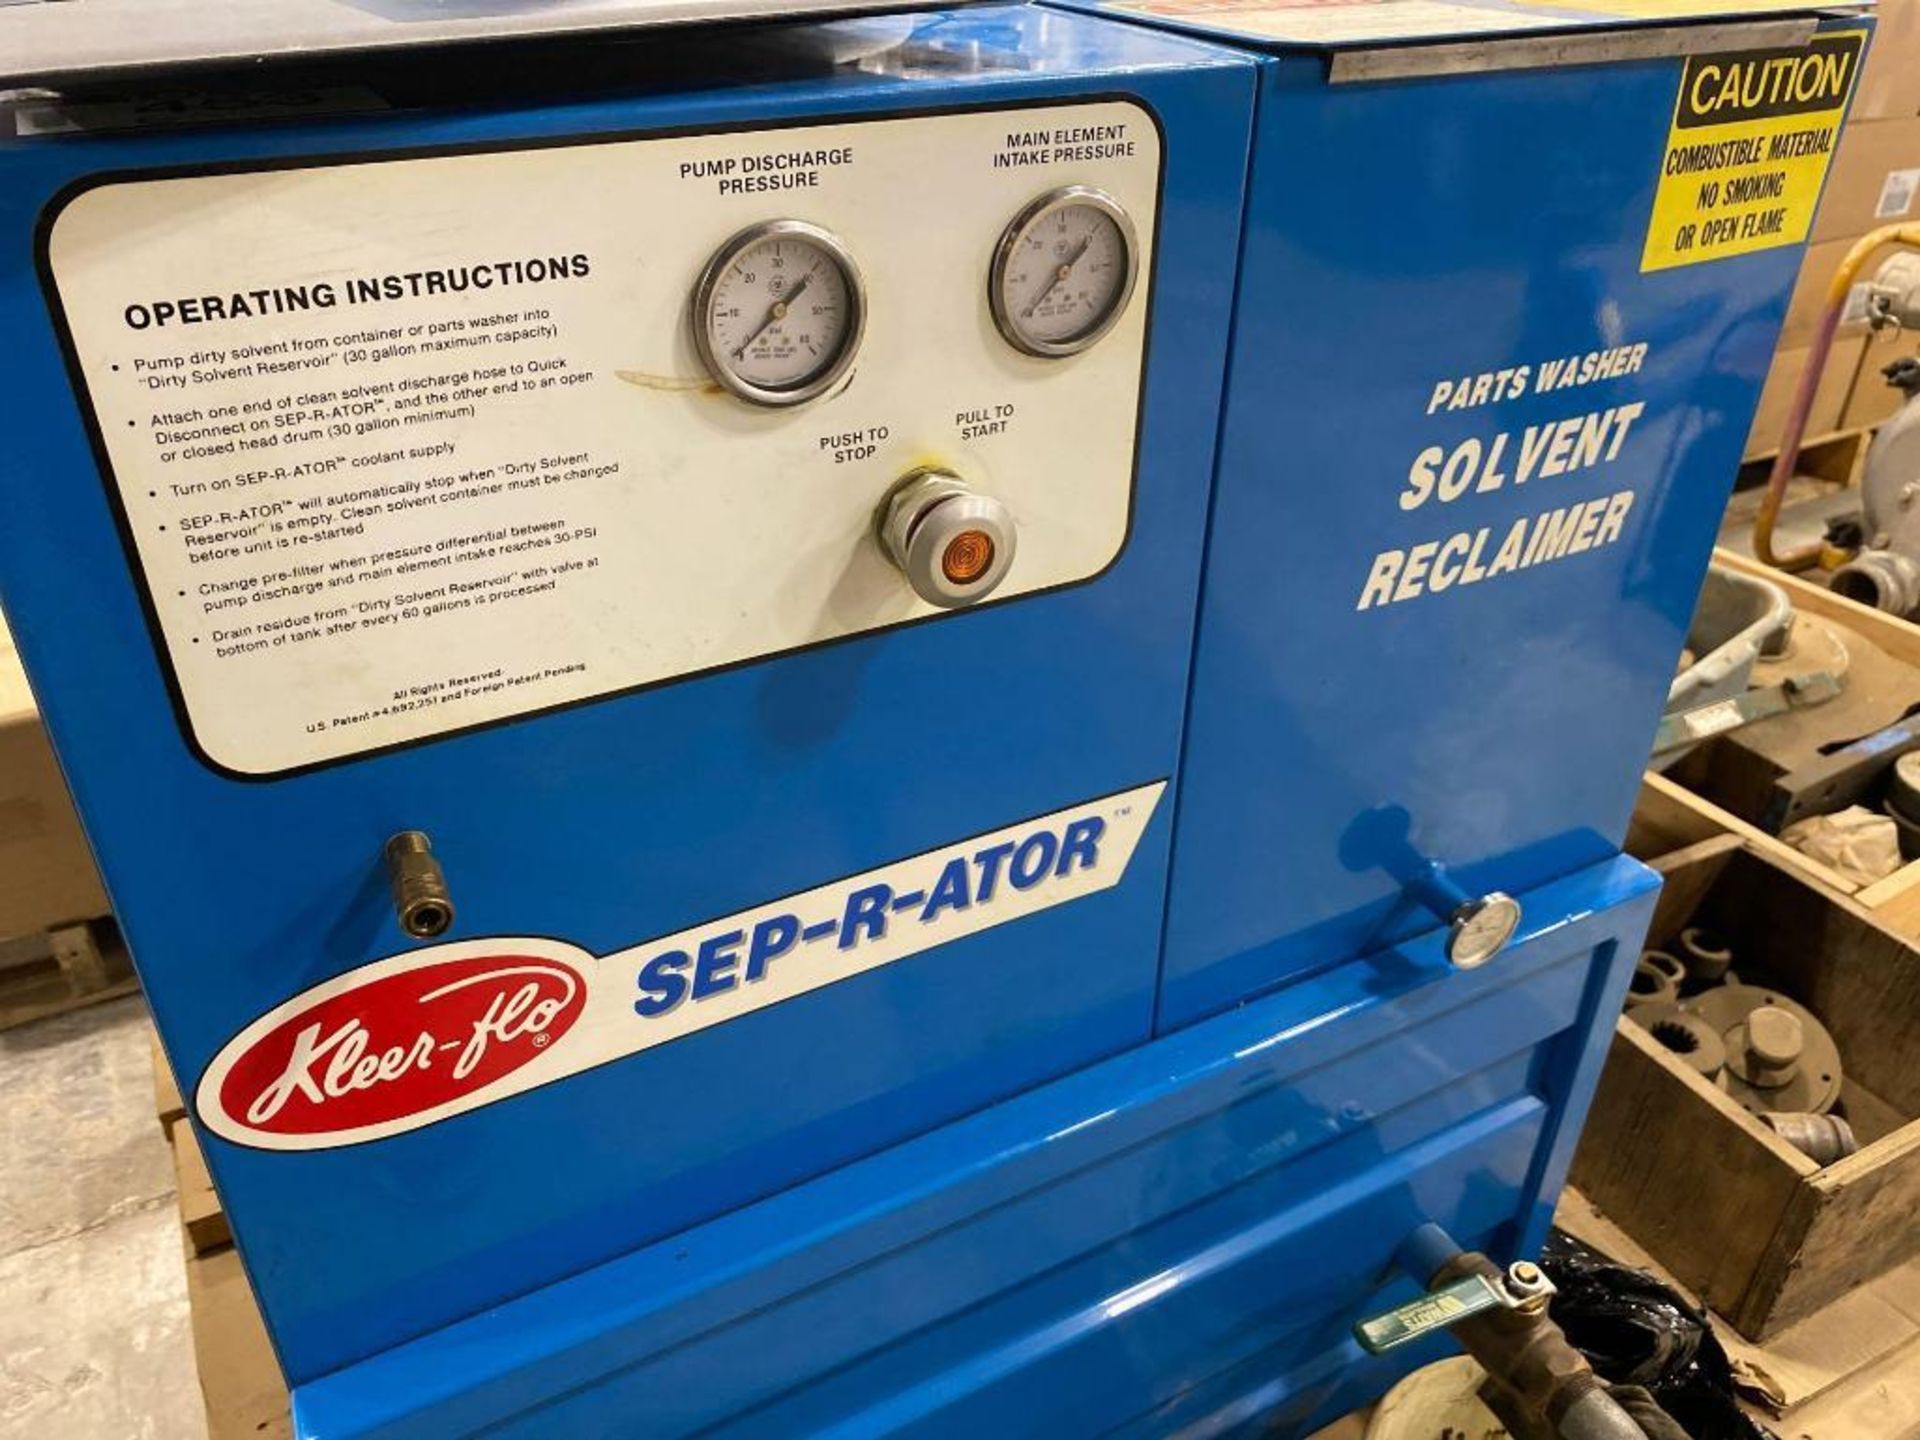 Kleer-Flo Sep-R-Ator Parts Washer Solvent Reclaimer 430-1400, 3/4HP, 1PH - Image 3 of 4